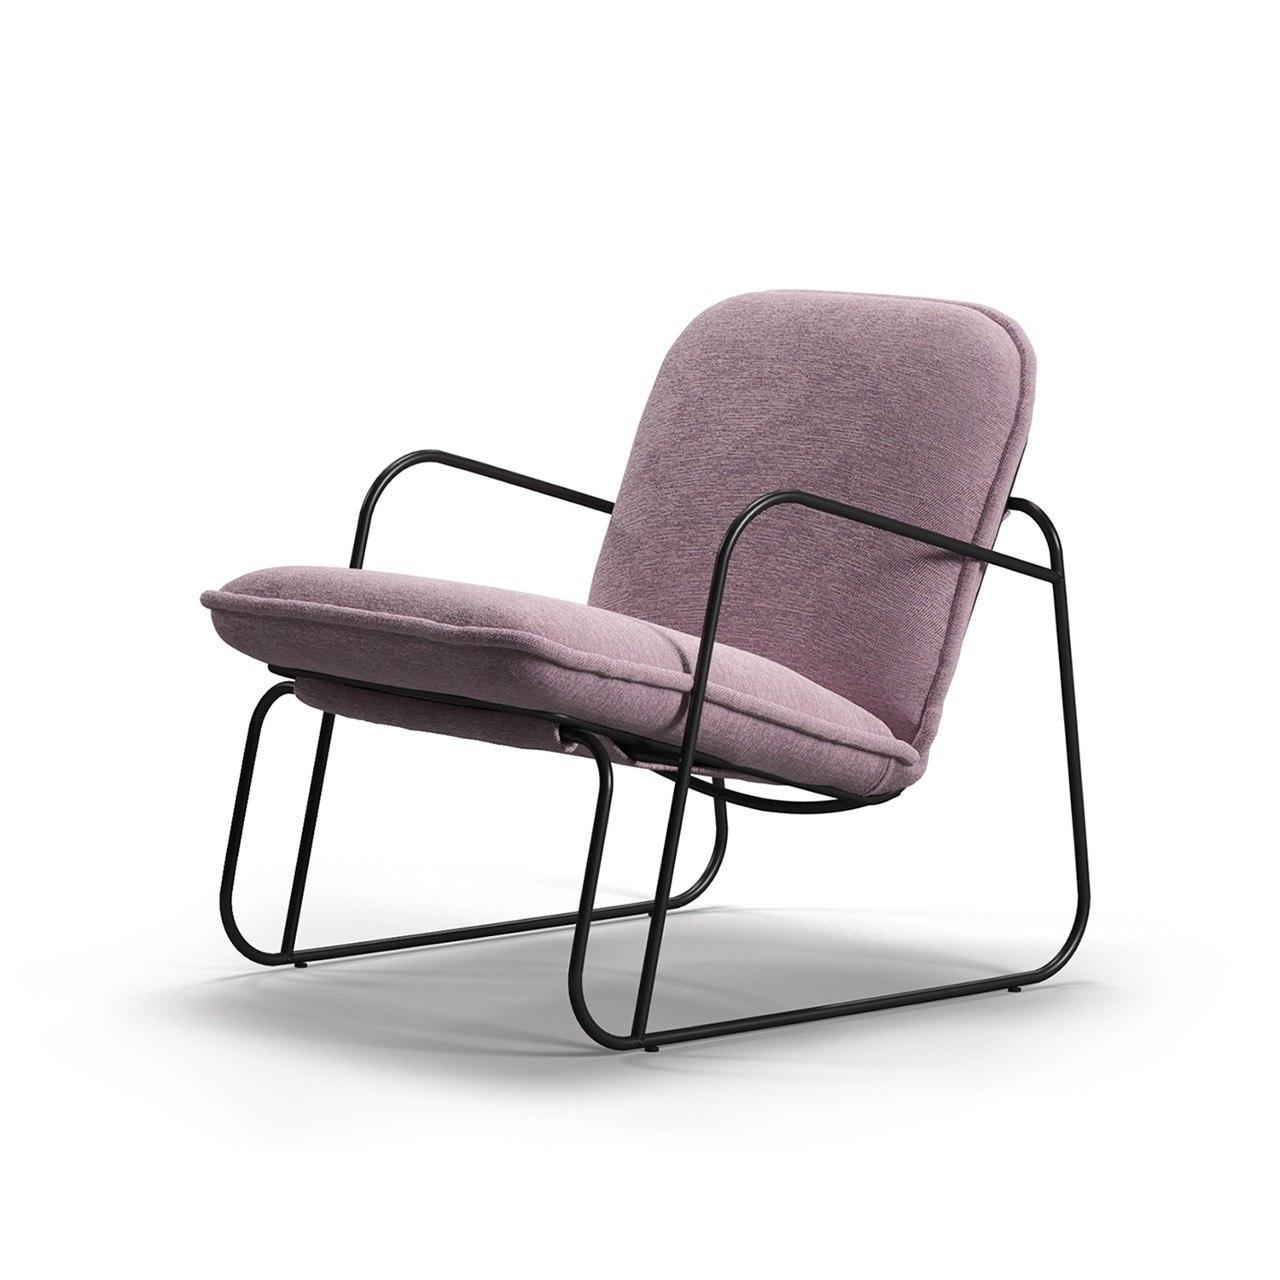 Tuttu Armchair by Artu
Pavel Vetrov
Dimensions: W 67 x D 84 x H 78 cm
Materials: Metal, Upholstery
Other colors and materials available. Please contact us.

Collection Tuttu Monteur takes its name from a french word “editor”. Inspired by a